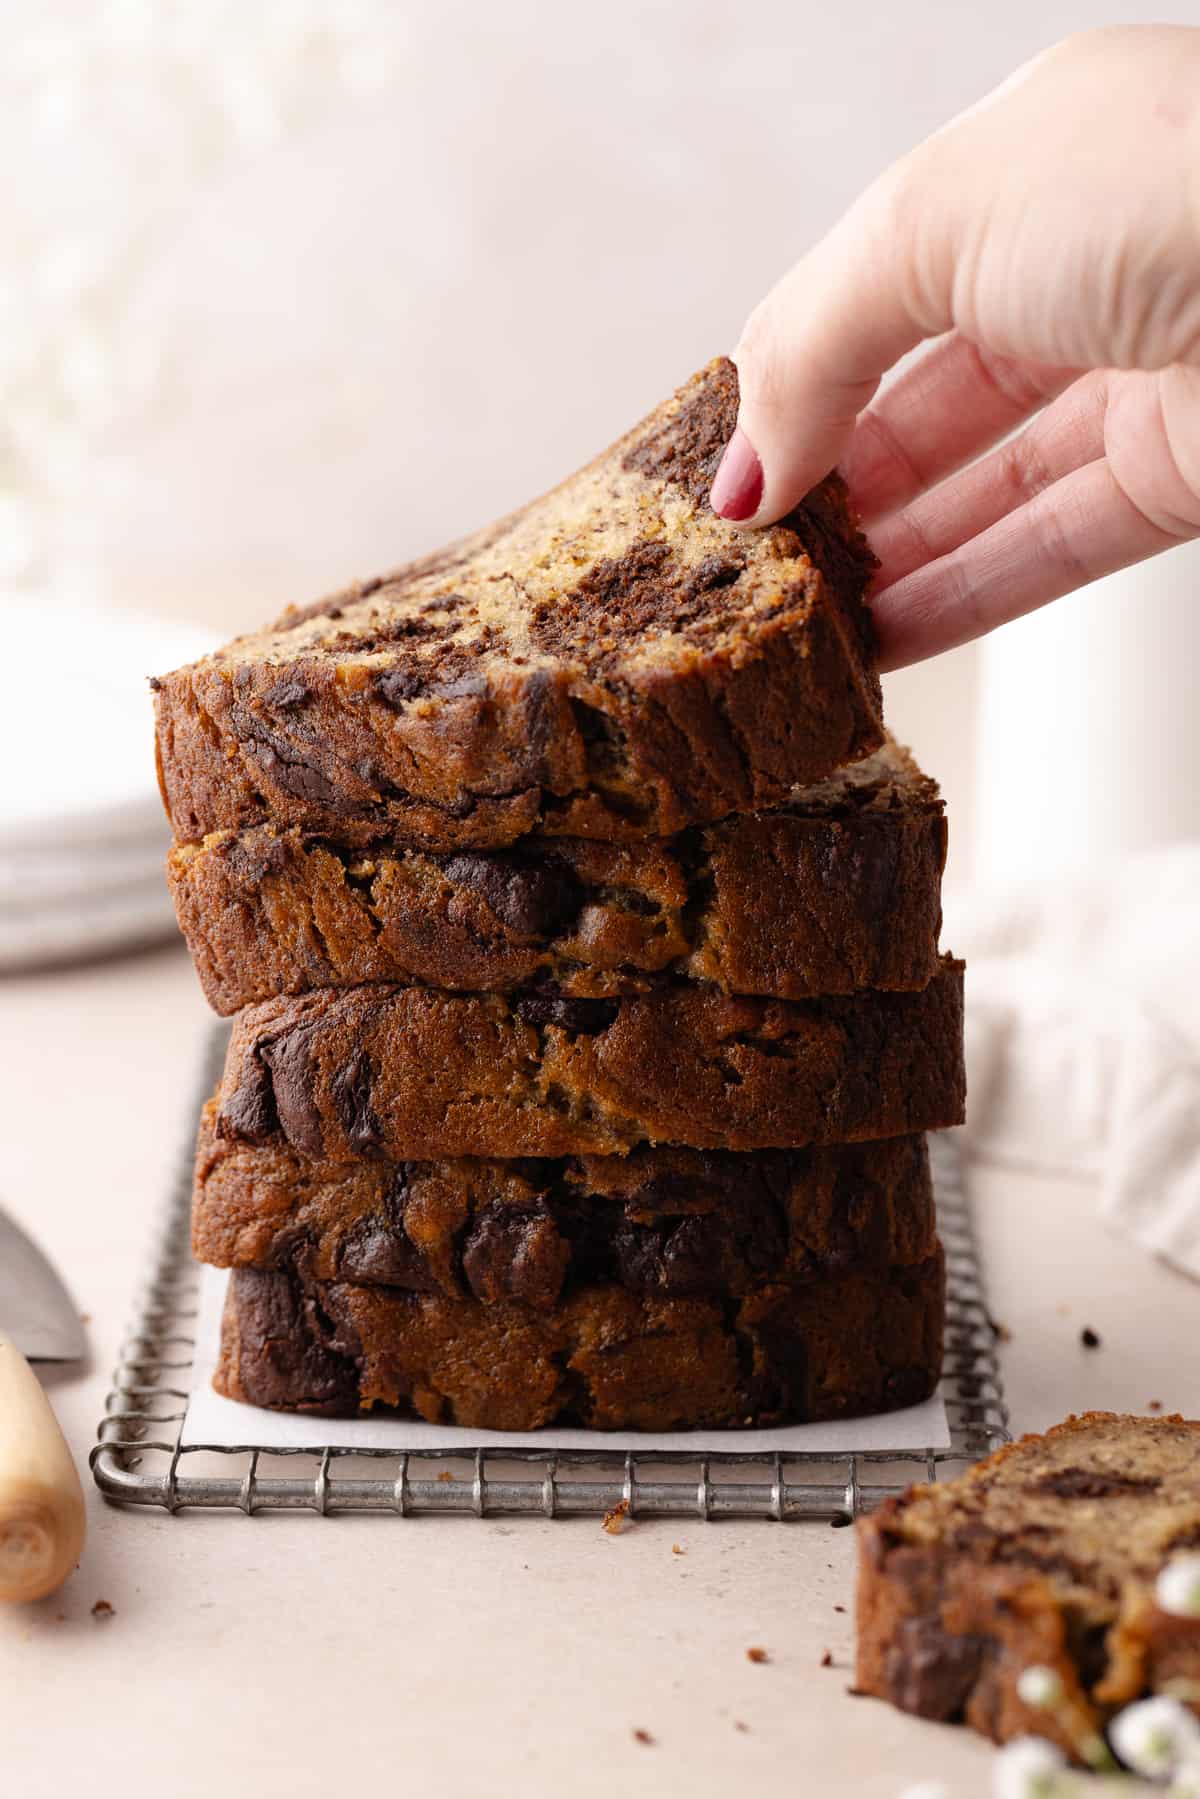 Hand grabs a slice of chocolate marbled banana bread sliced on wire rack.